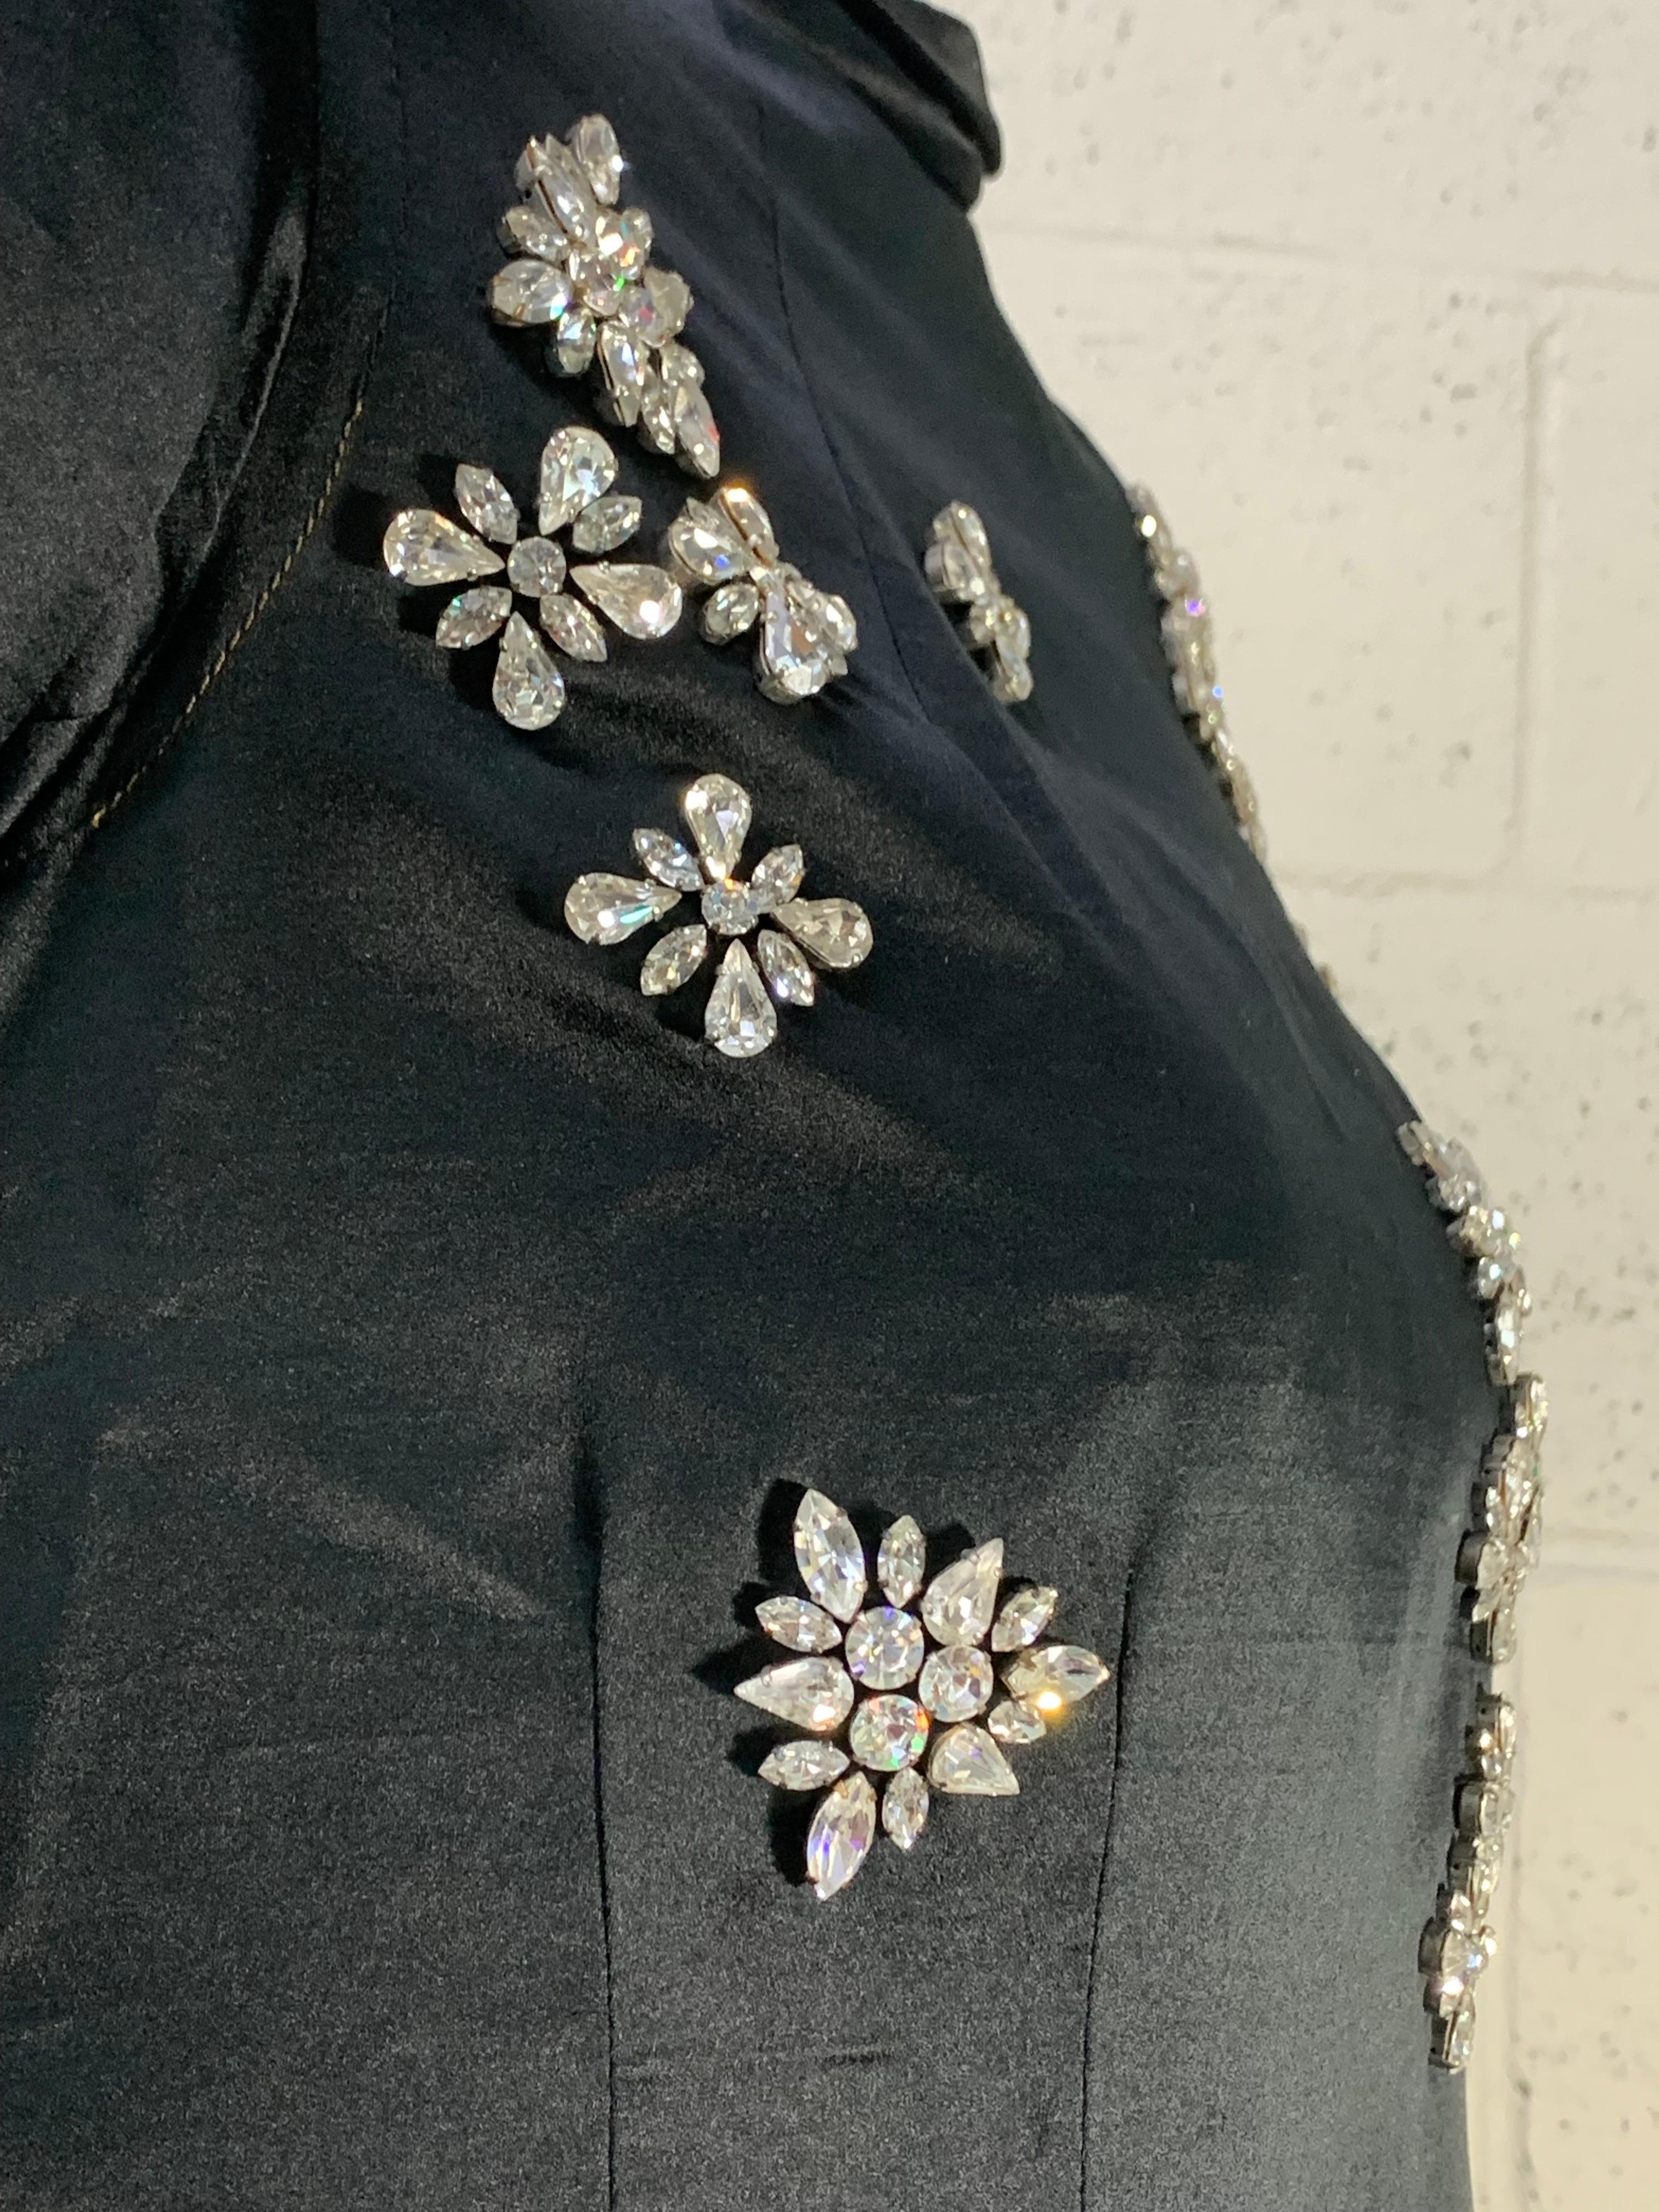 1968 James Galanos Black Silk Satin A-Line Cocktail Dress w Scattered Rhinestone In Excellent Condition For Sale In Gresham, OR